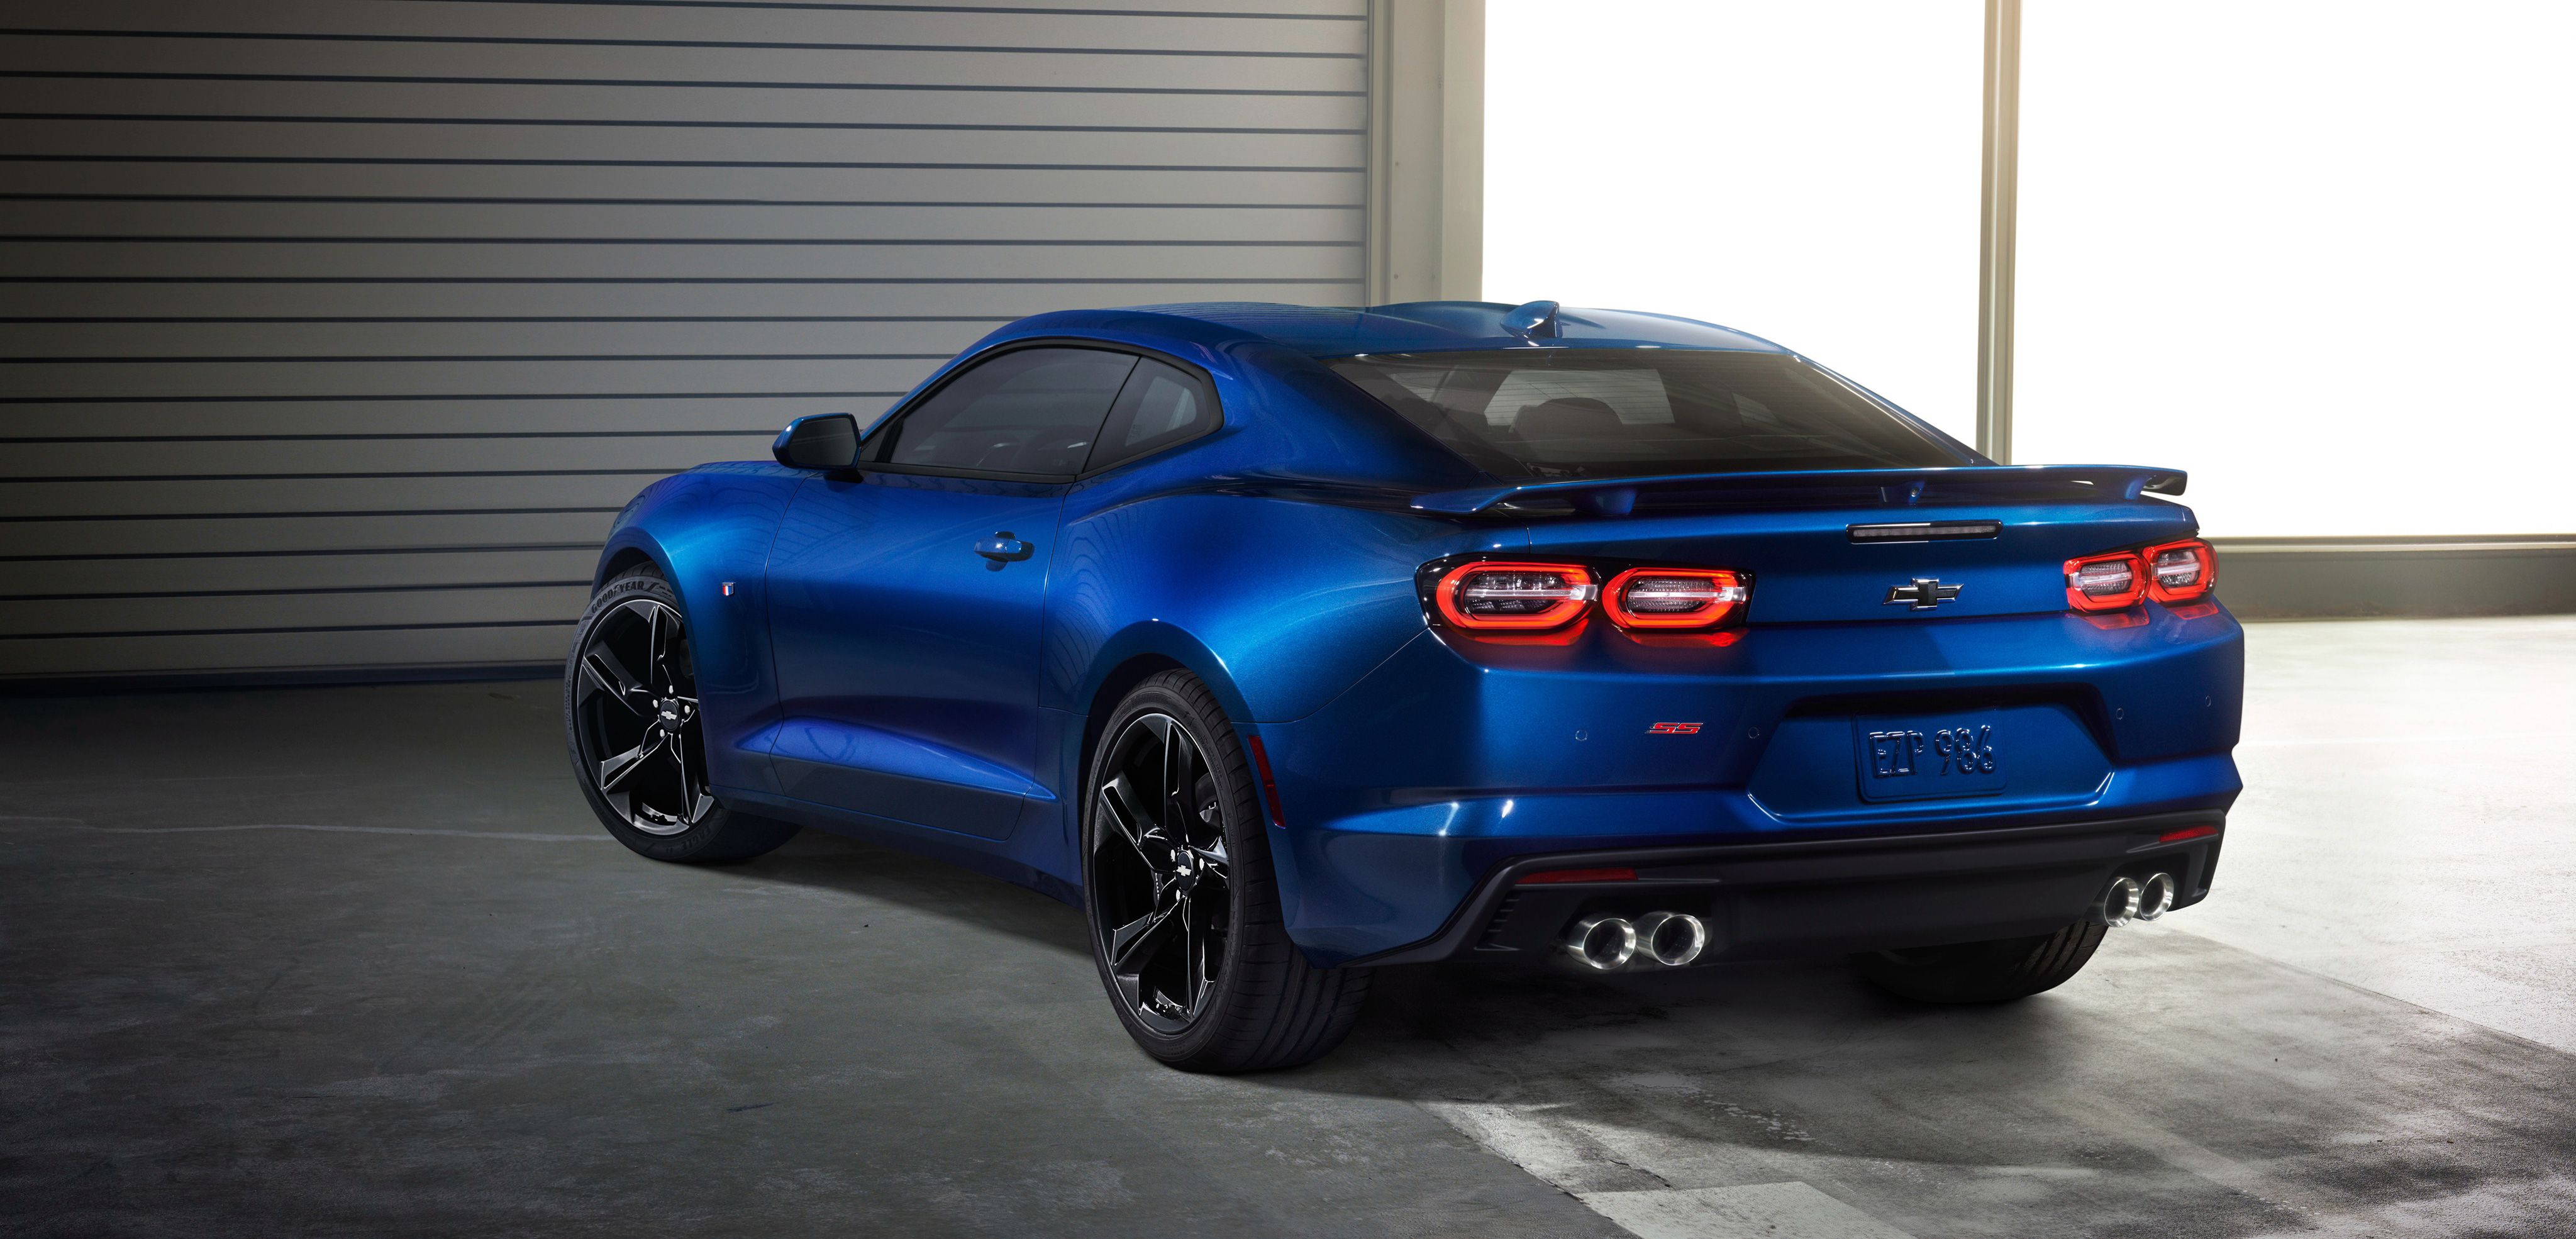 Chevrolet Camaro SS 2018 Rear, HD Cars, 4k Wallpaper, Image, Background, Photo and Picture